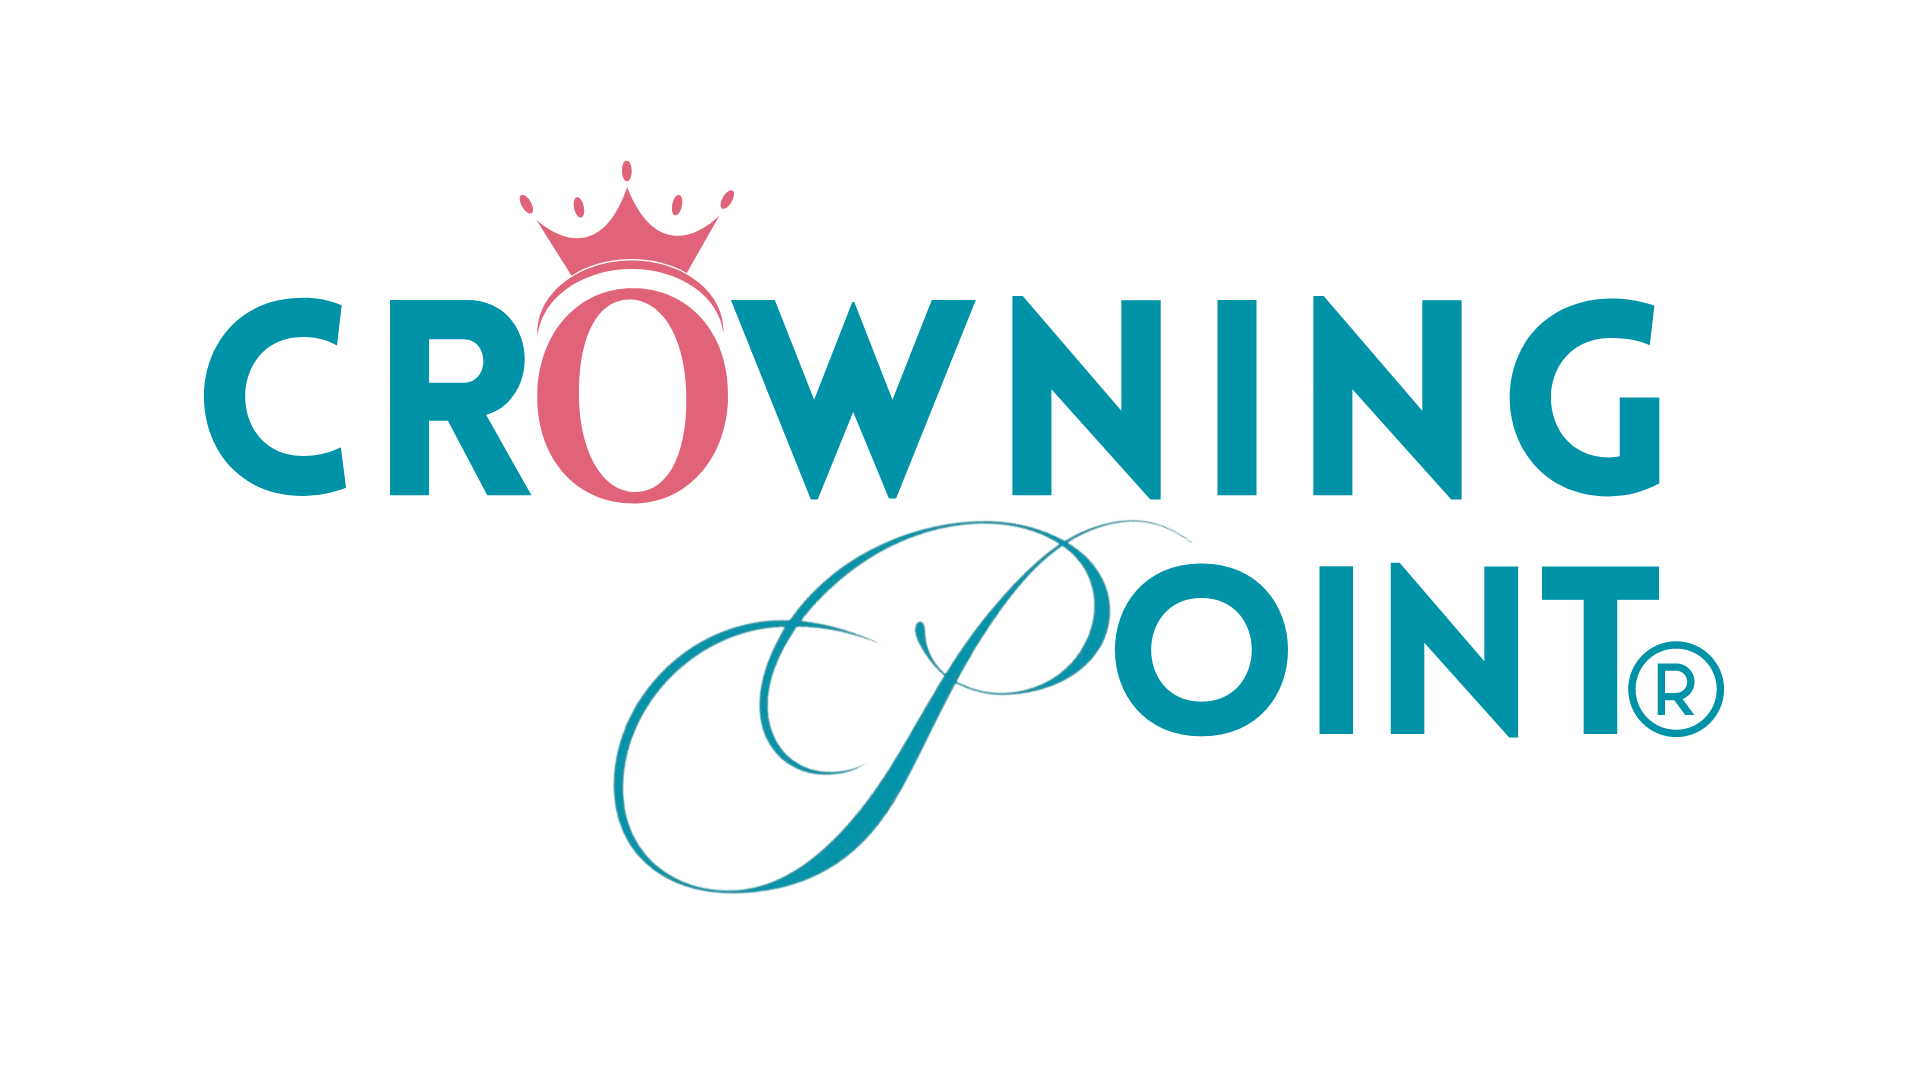 Crowning Point logo